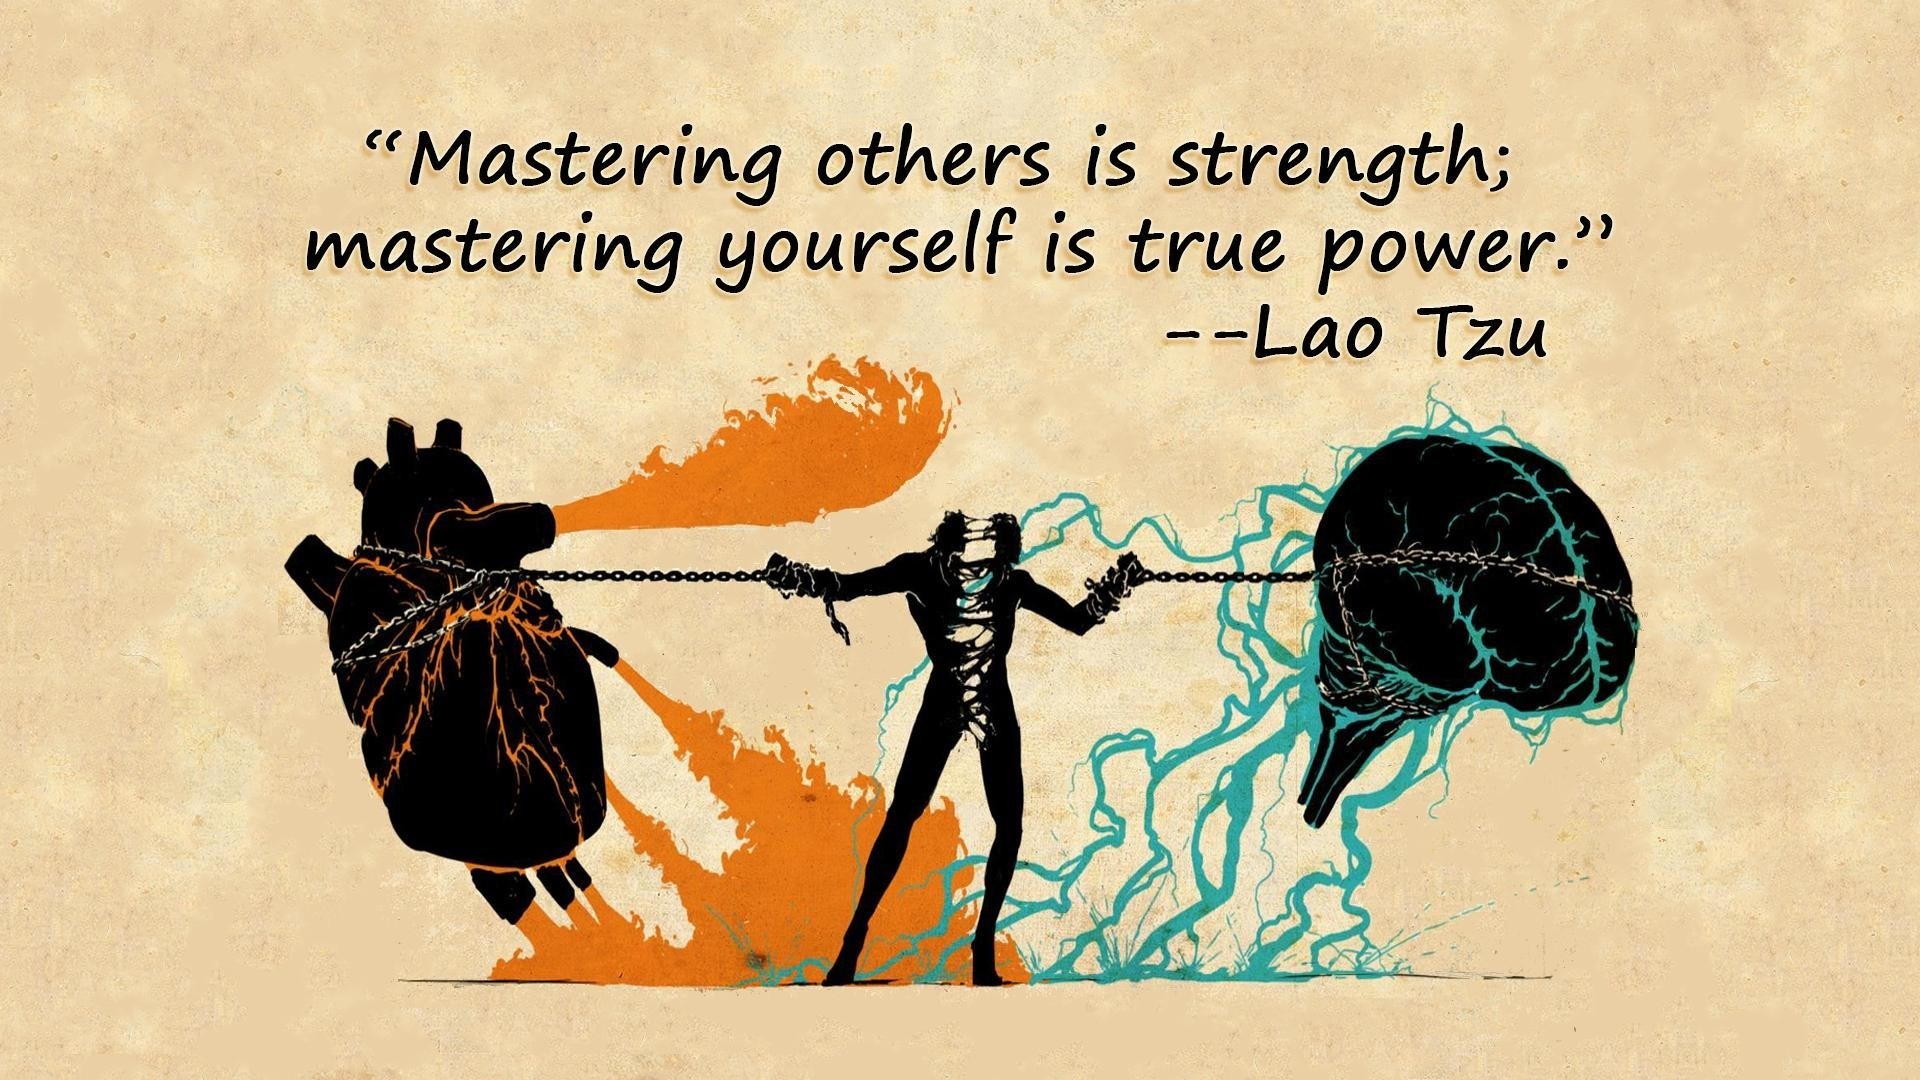 our-perception-of-leadership-needs-to-change-lao-tsu-mastering-others-strength-yourself-true-power